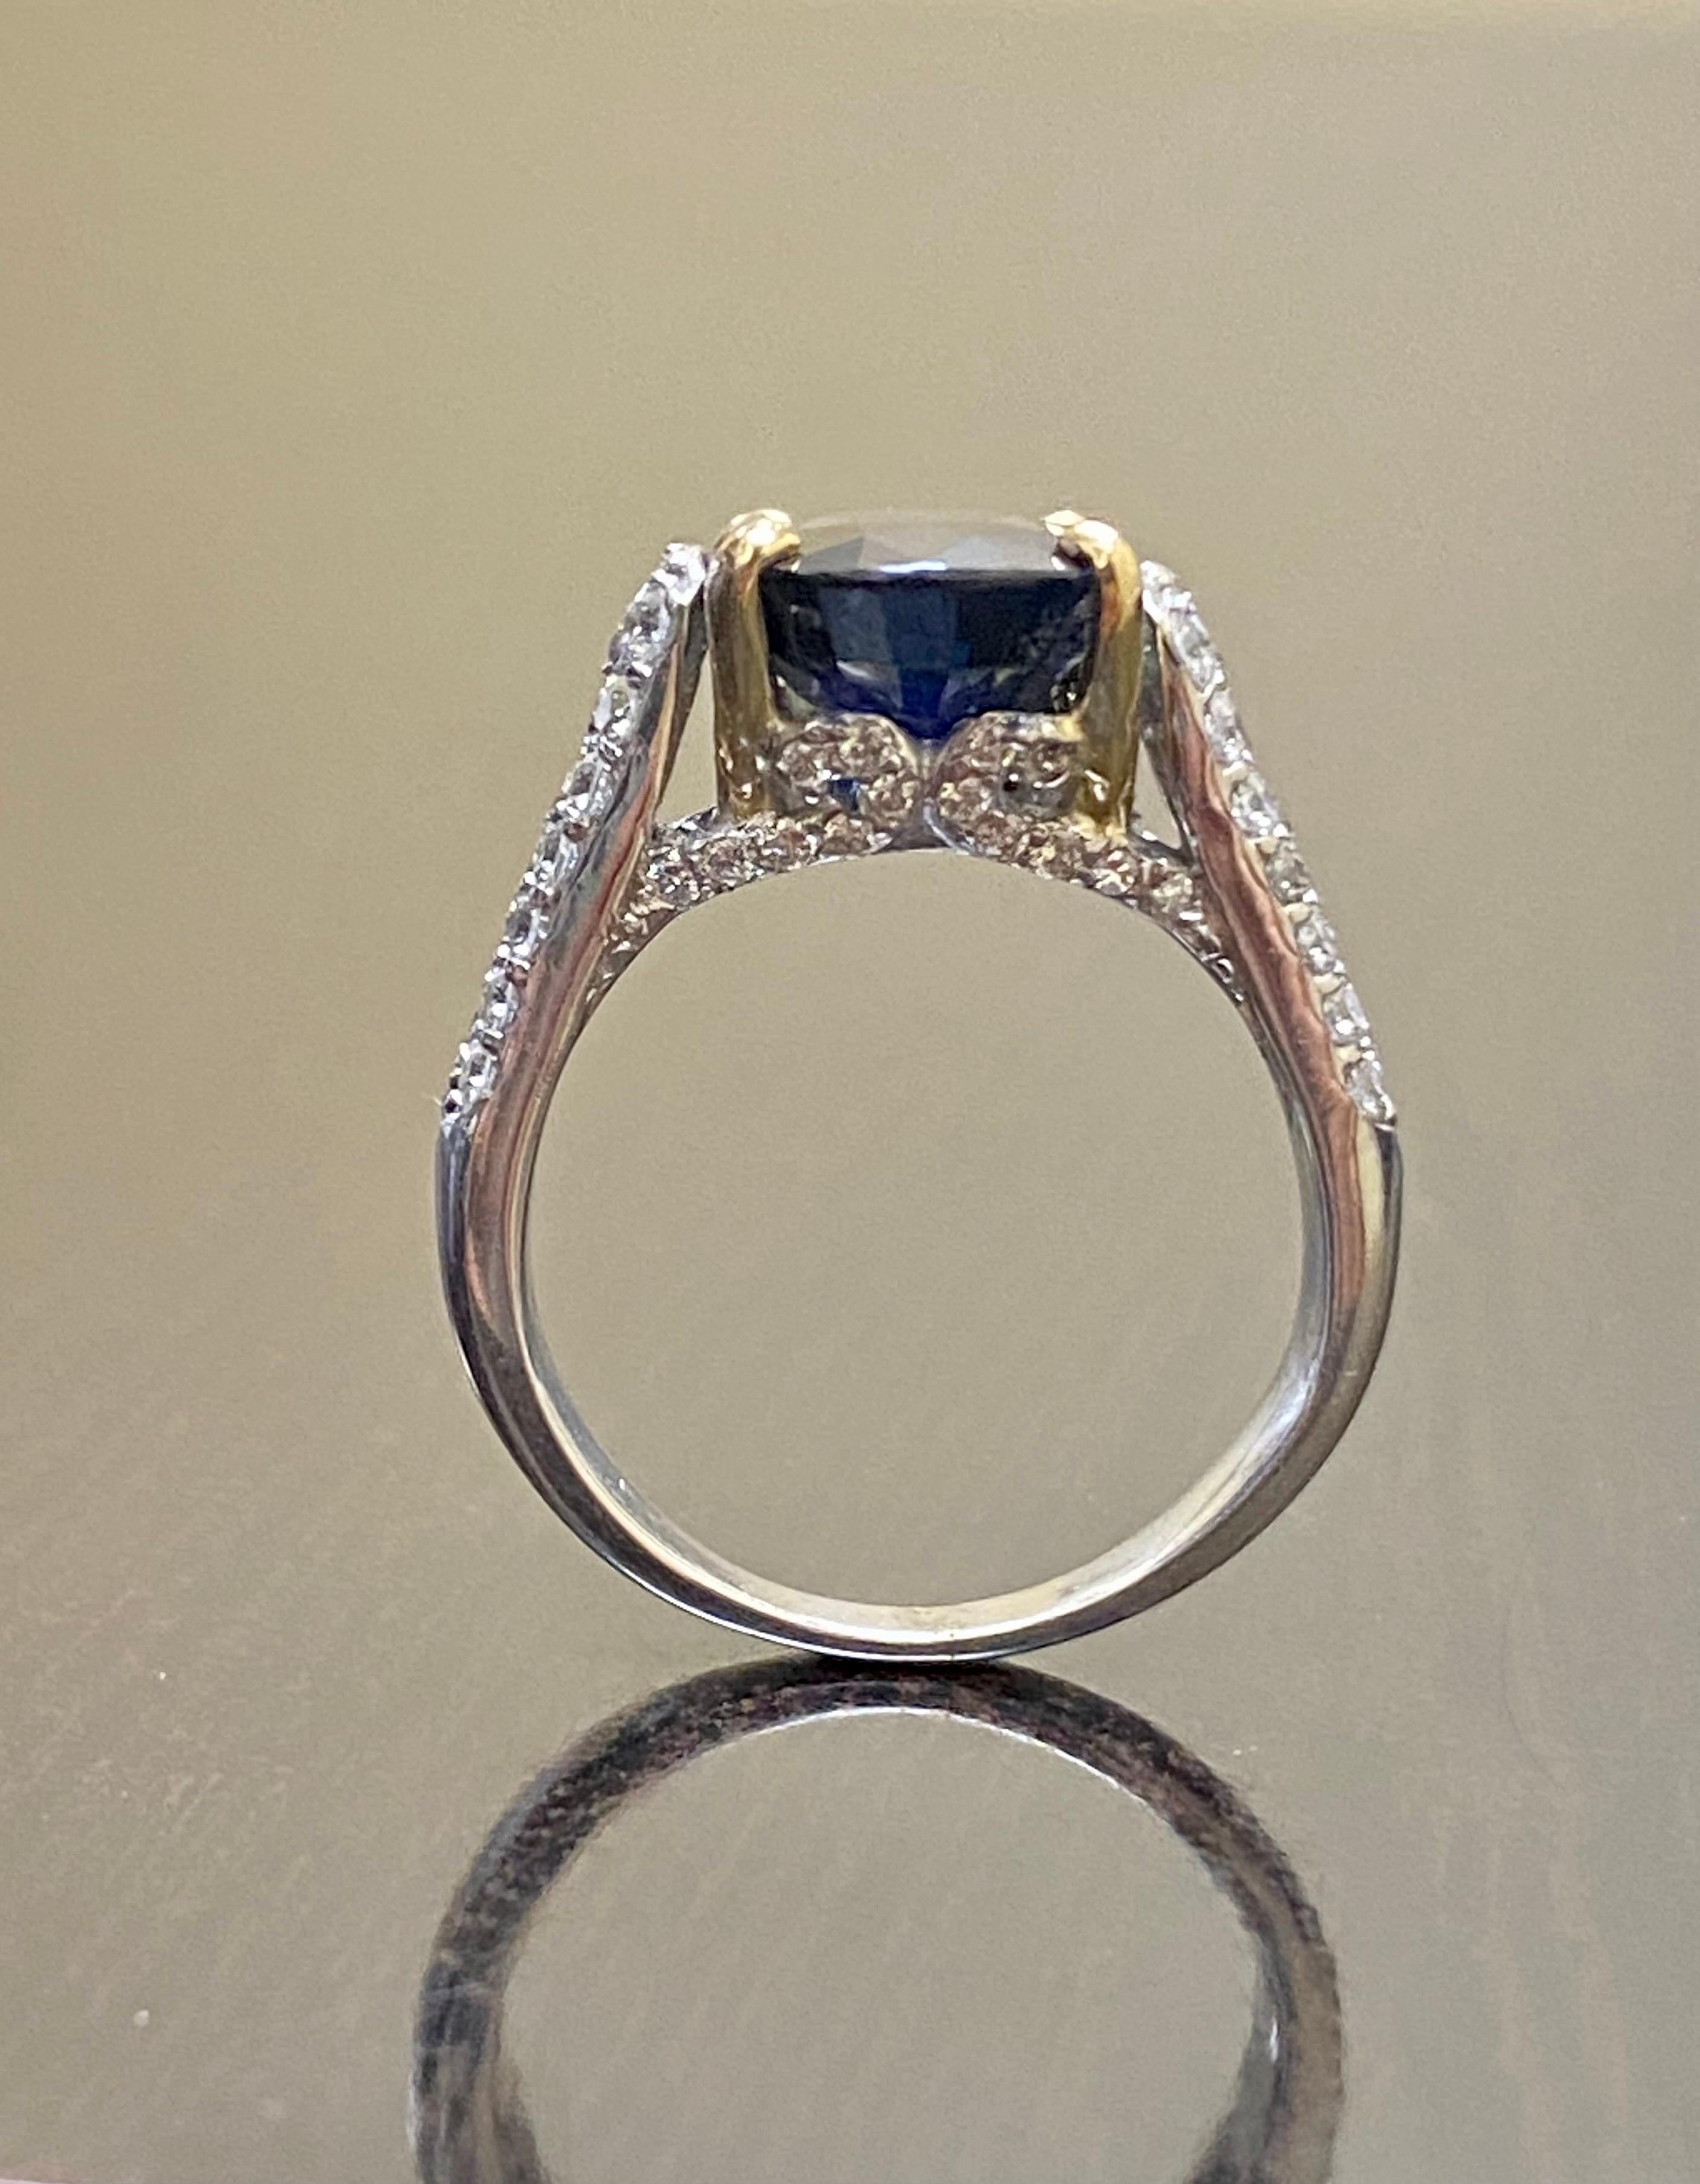 DeKara Designs Collection

Our latest design! An elegant and lustrous Blue Sapphire surrounded beautifully by diamonds in a two tone unique setting!

Metal- 14K White Gold, .583.

Size- 6 1/2.

Stones- Genuine Oval Midnight Blue Sapphire 5.02